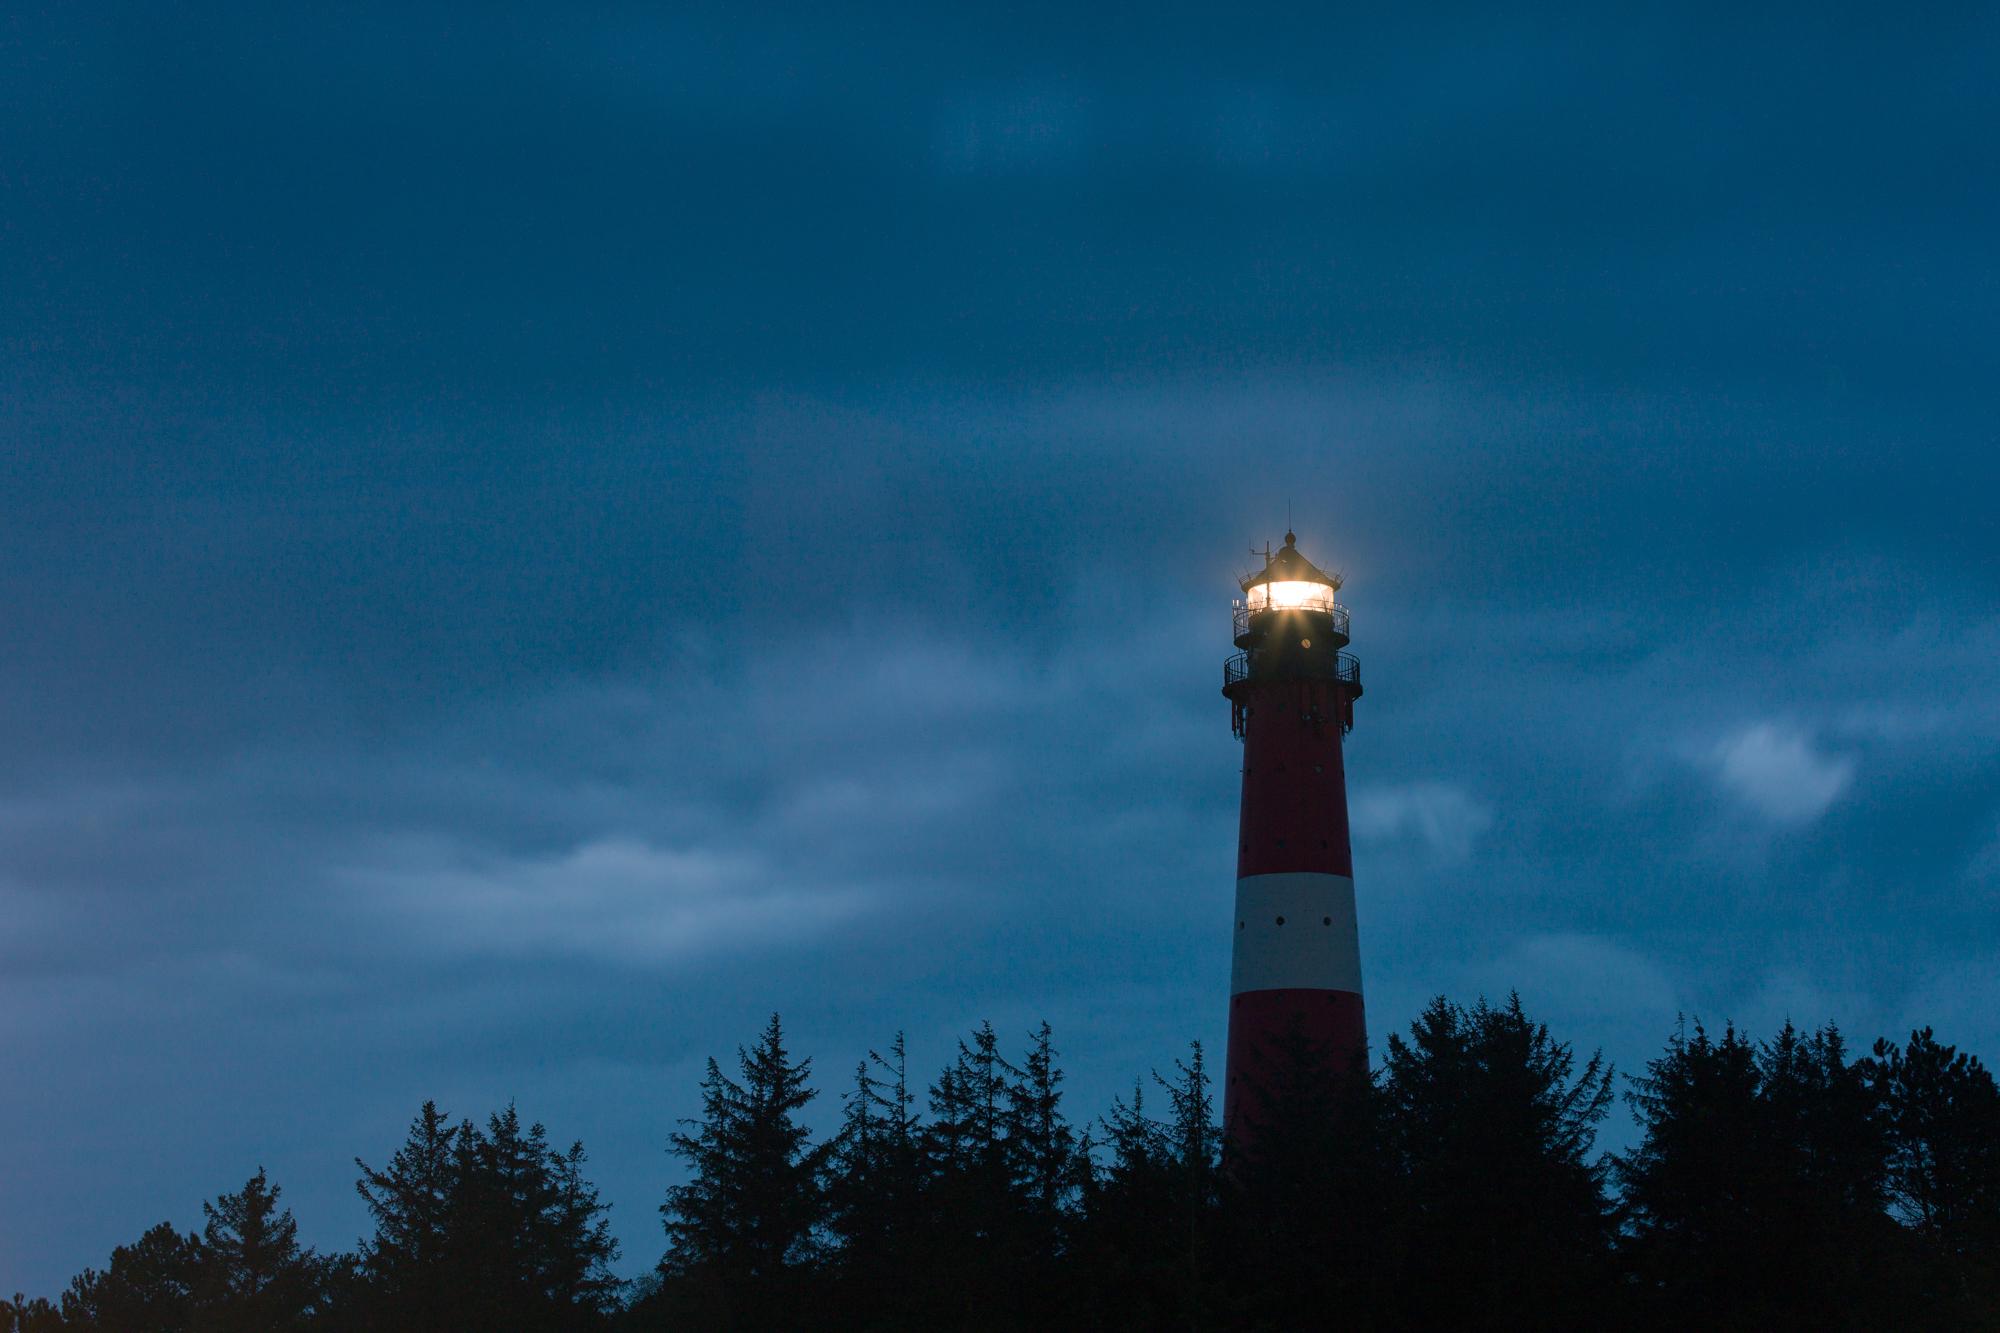 Light rain softens the sky. A long exposure catches the bright signal of this lighthouse.